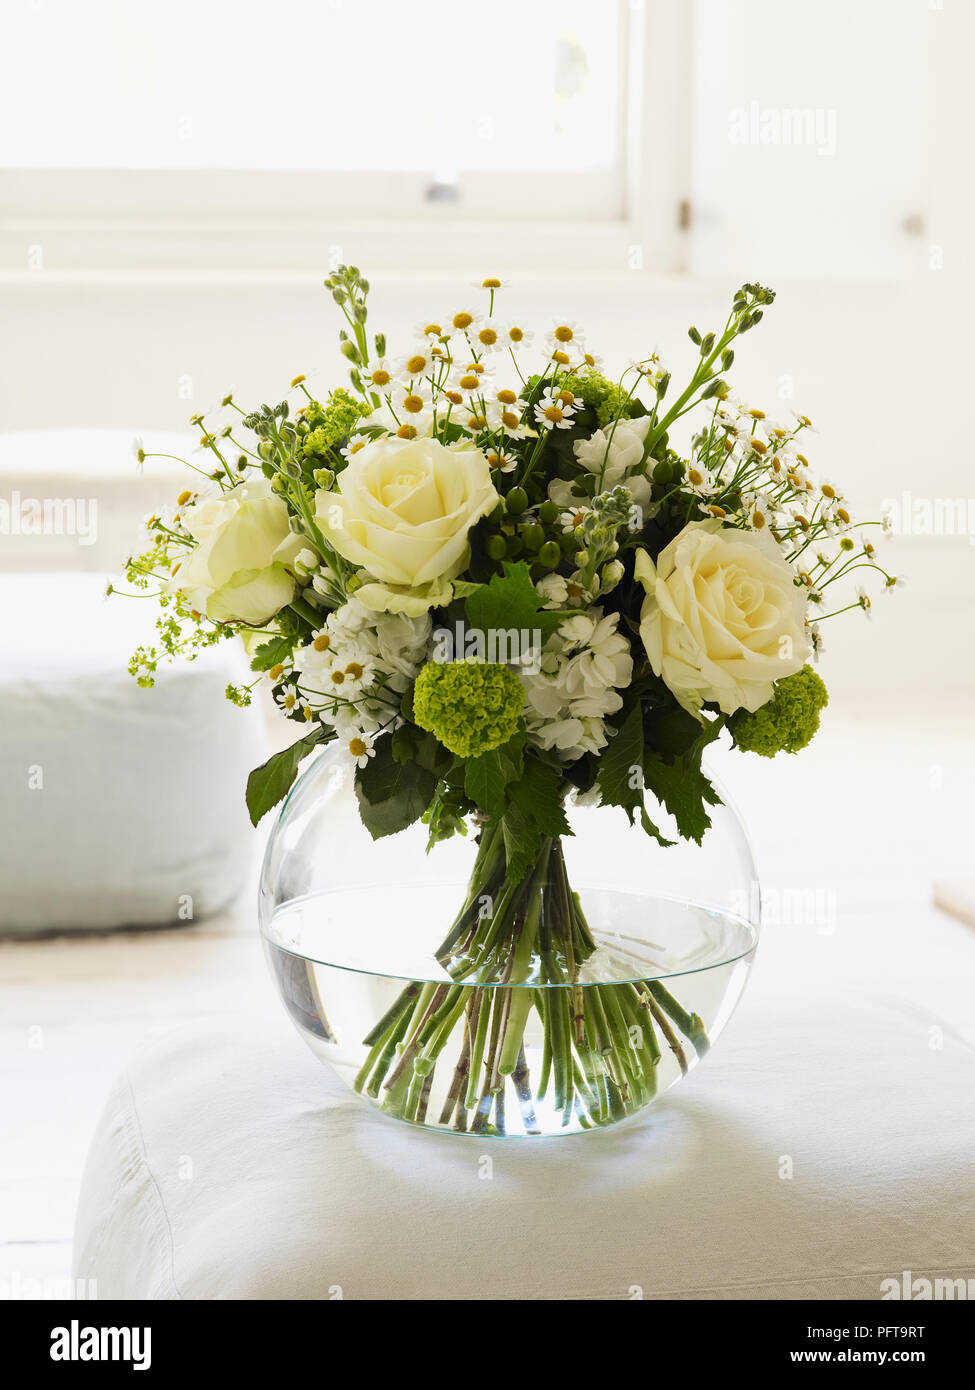 White and green hand tie bouquet, camomile, alchemilla mollis, guelder rose, white rose, hypericum, stock Stock Photo